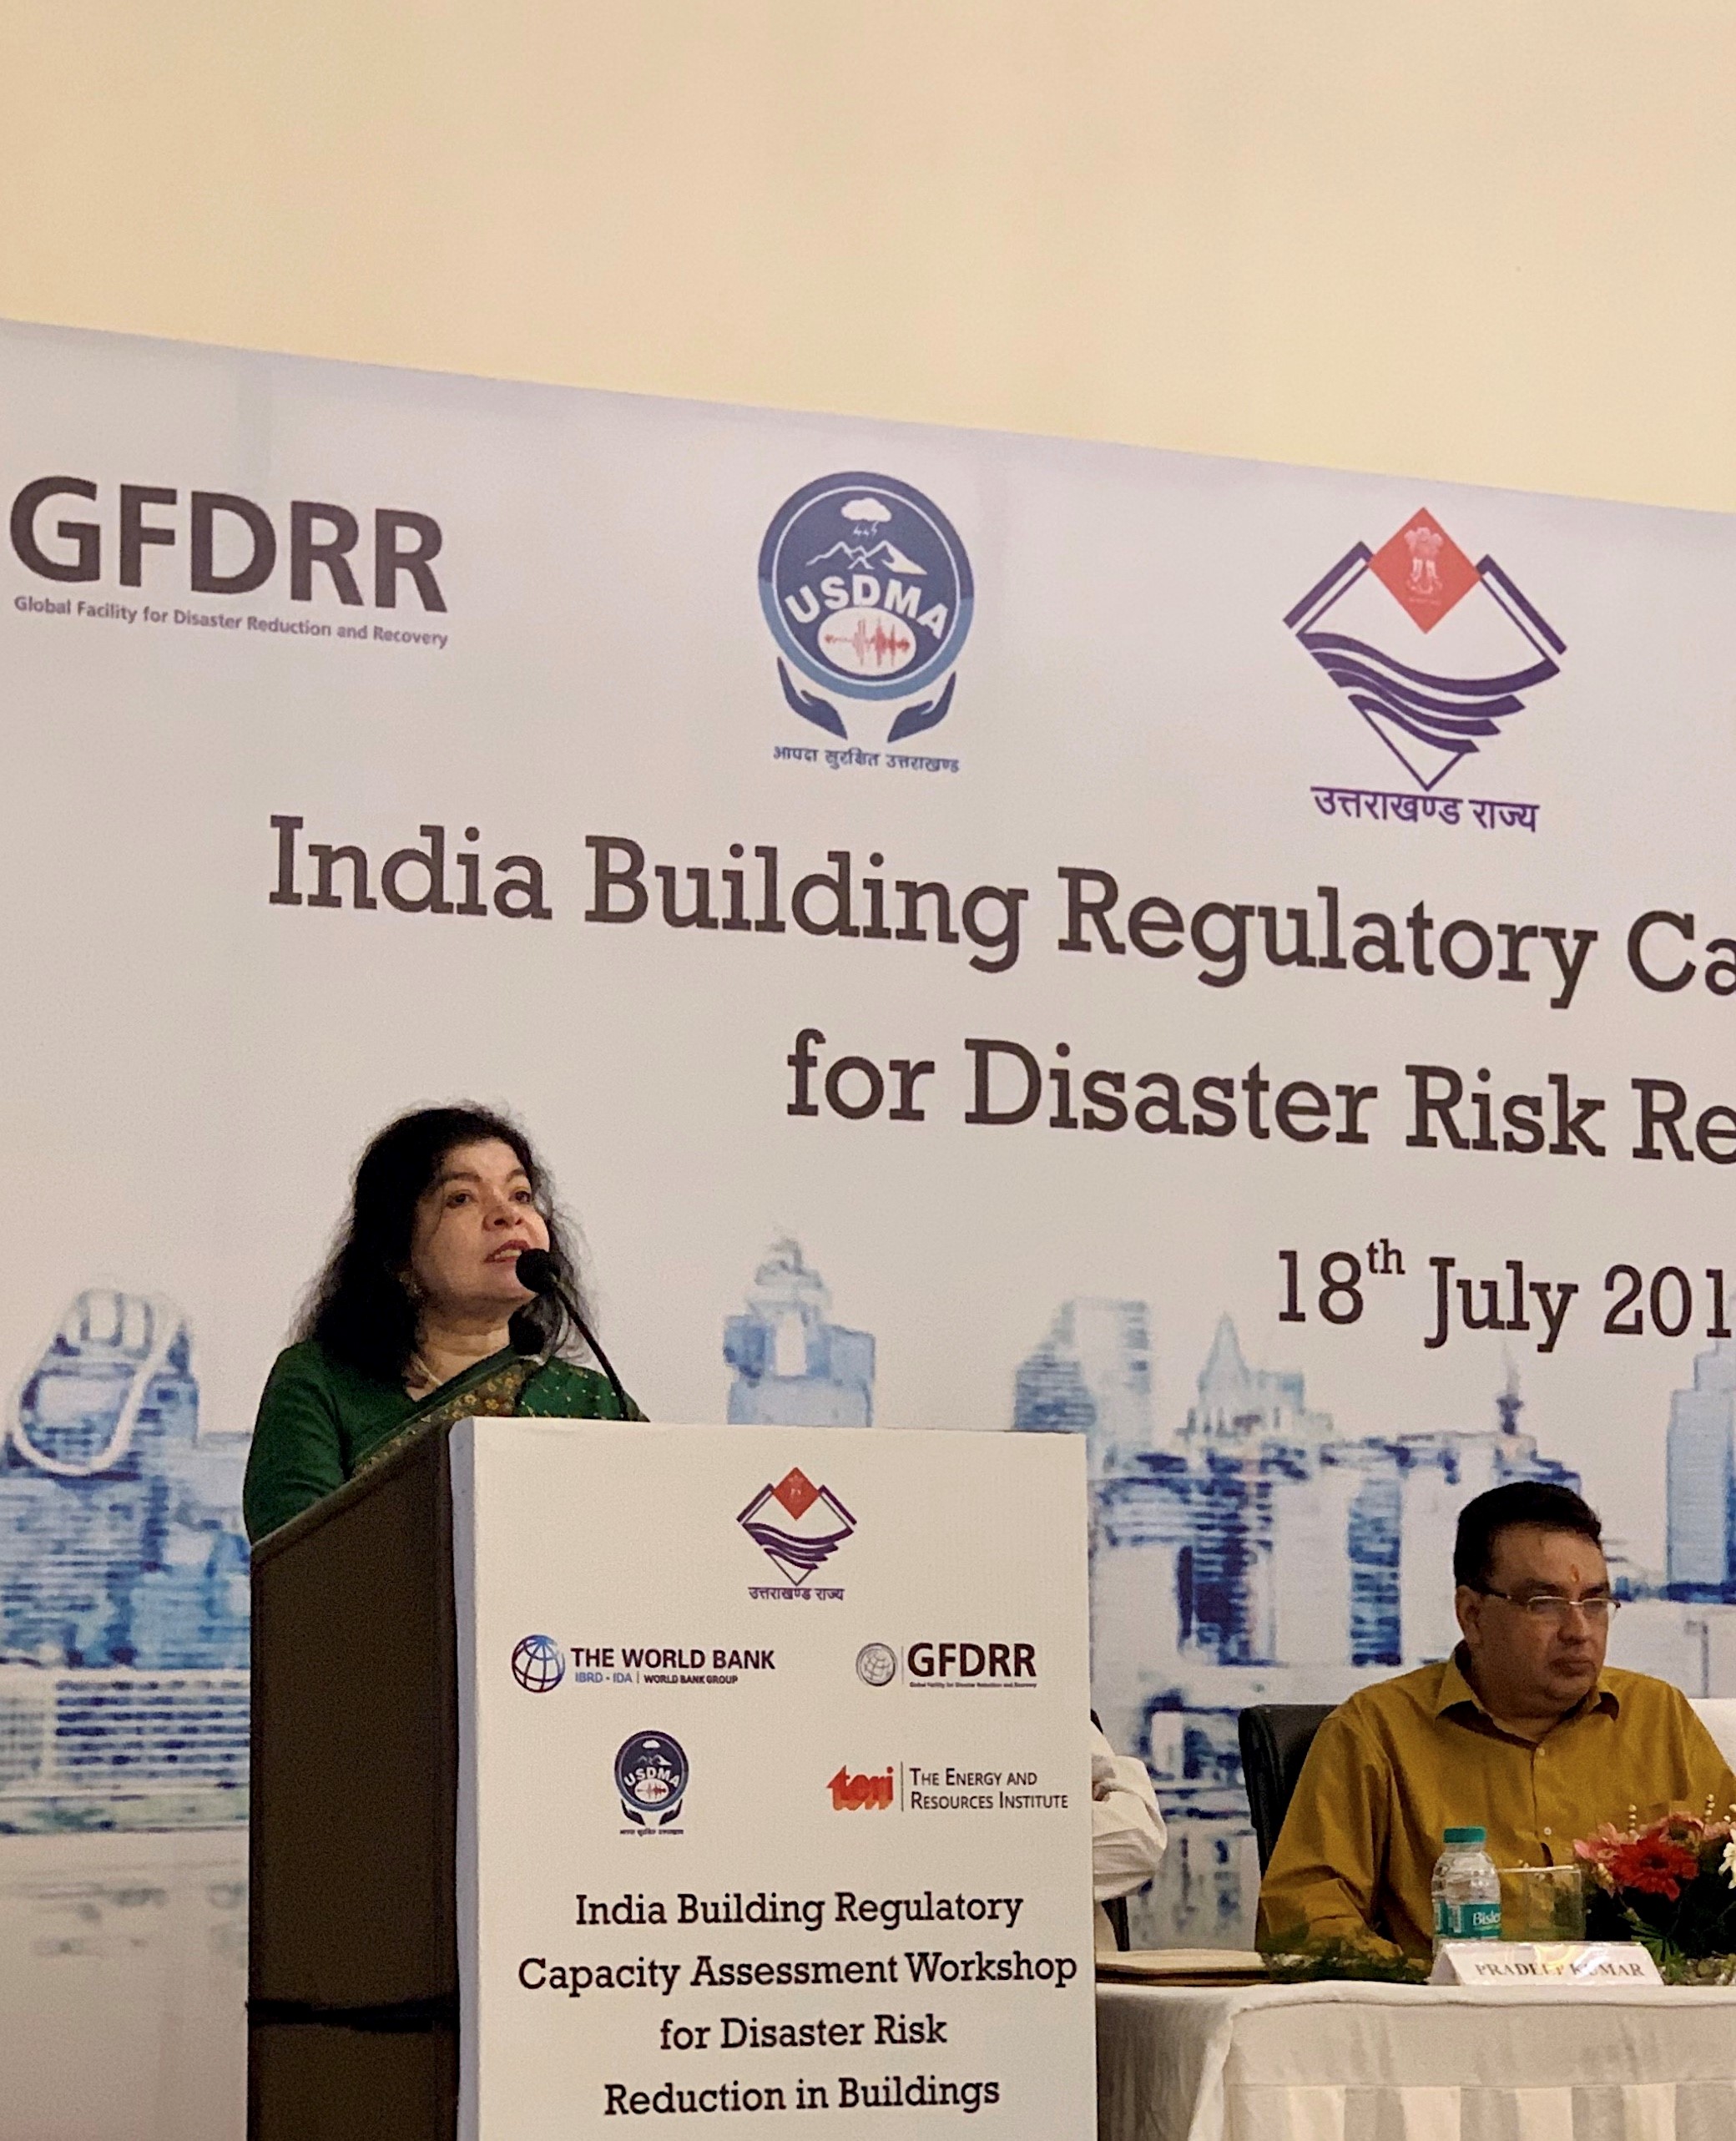 Doctor Alpa Sheth presents a review of building regulatory capacity in Jammu & Kashmir and Ladakh